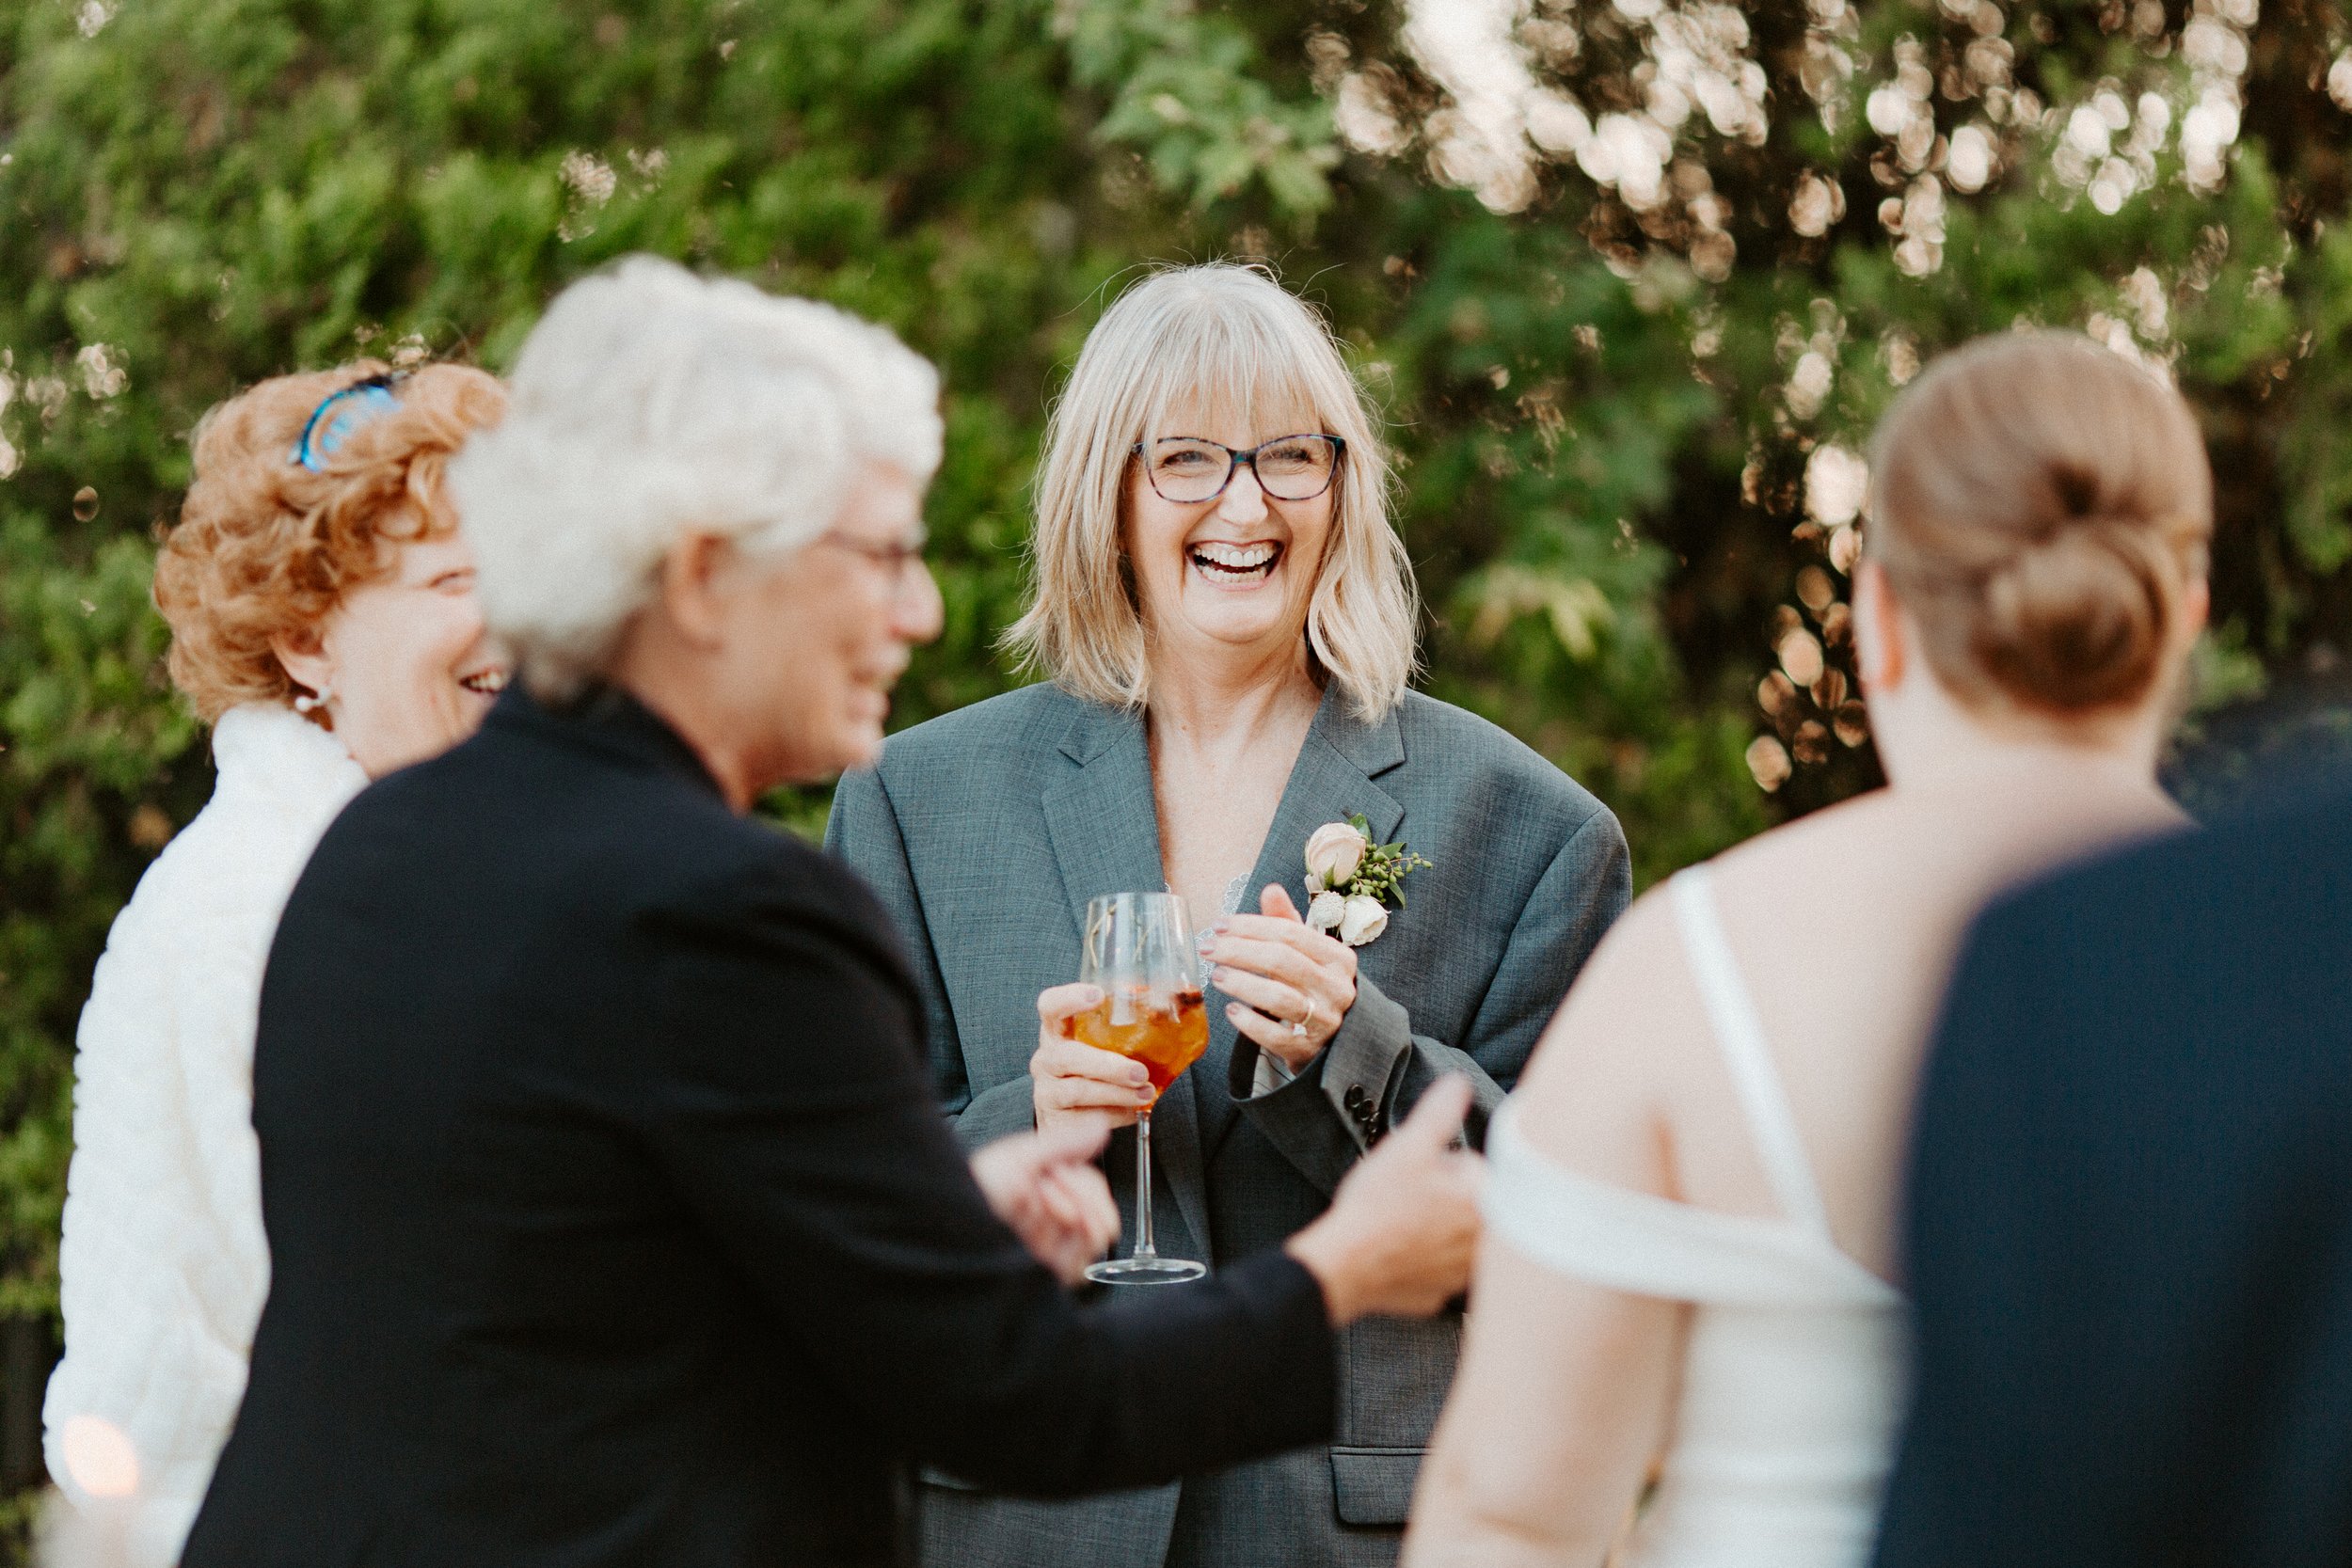 Guests Laughing with Cocktail.jpg